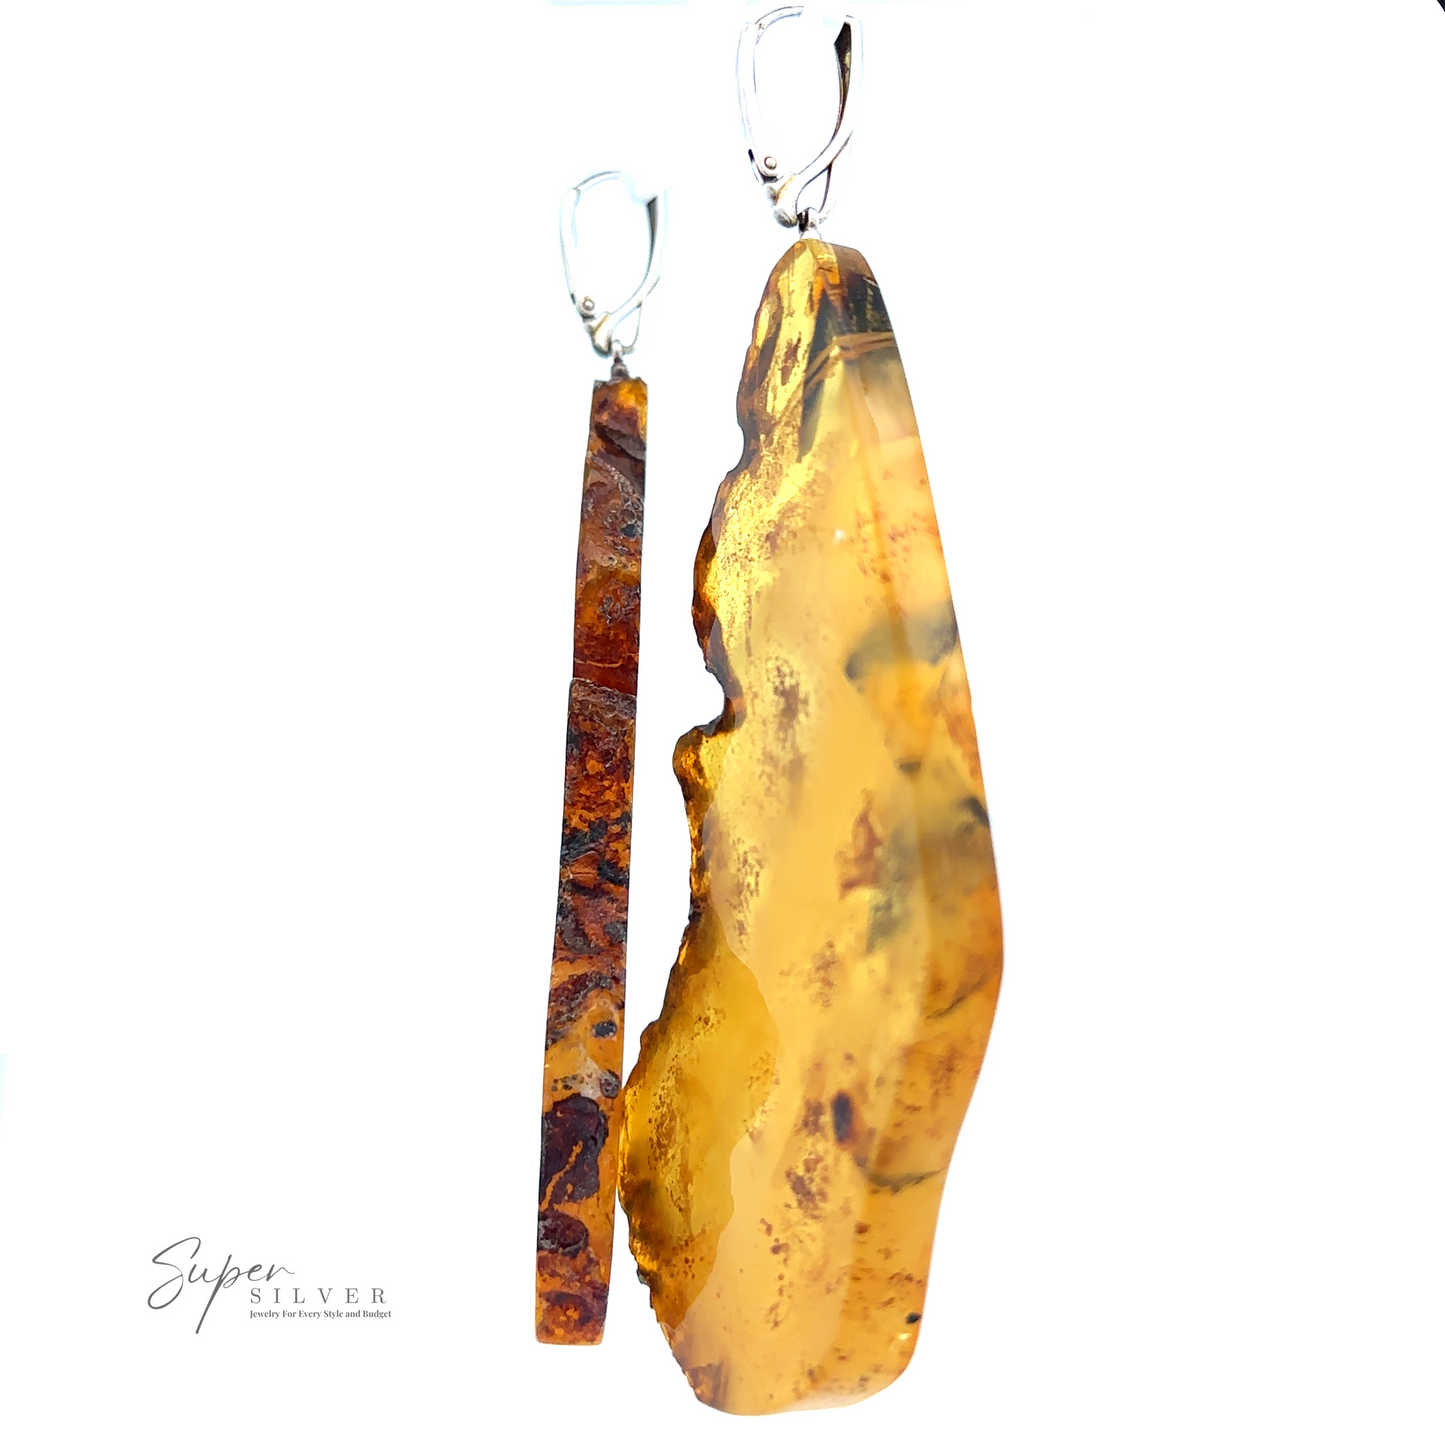 
                  
                    Two handcrafted pendants displayed against a white background. The left pendant is thin and brown with a rugged texture, while the right pendant features Designer Raw Cognac Amber Slab Earrings, larger, translucent yellow, and smoothly polished.
                  
                